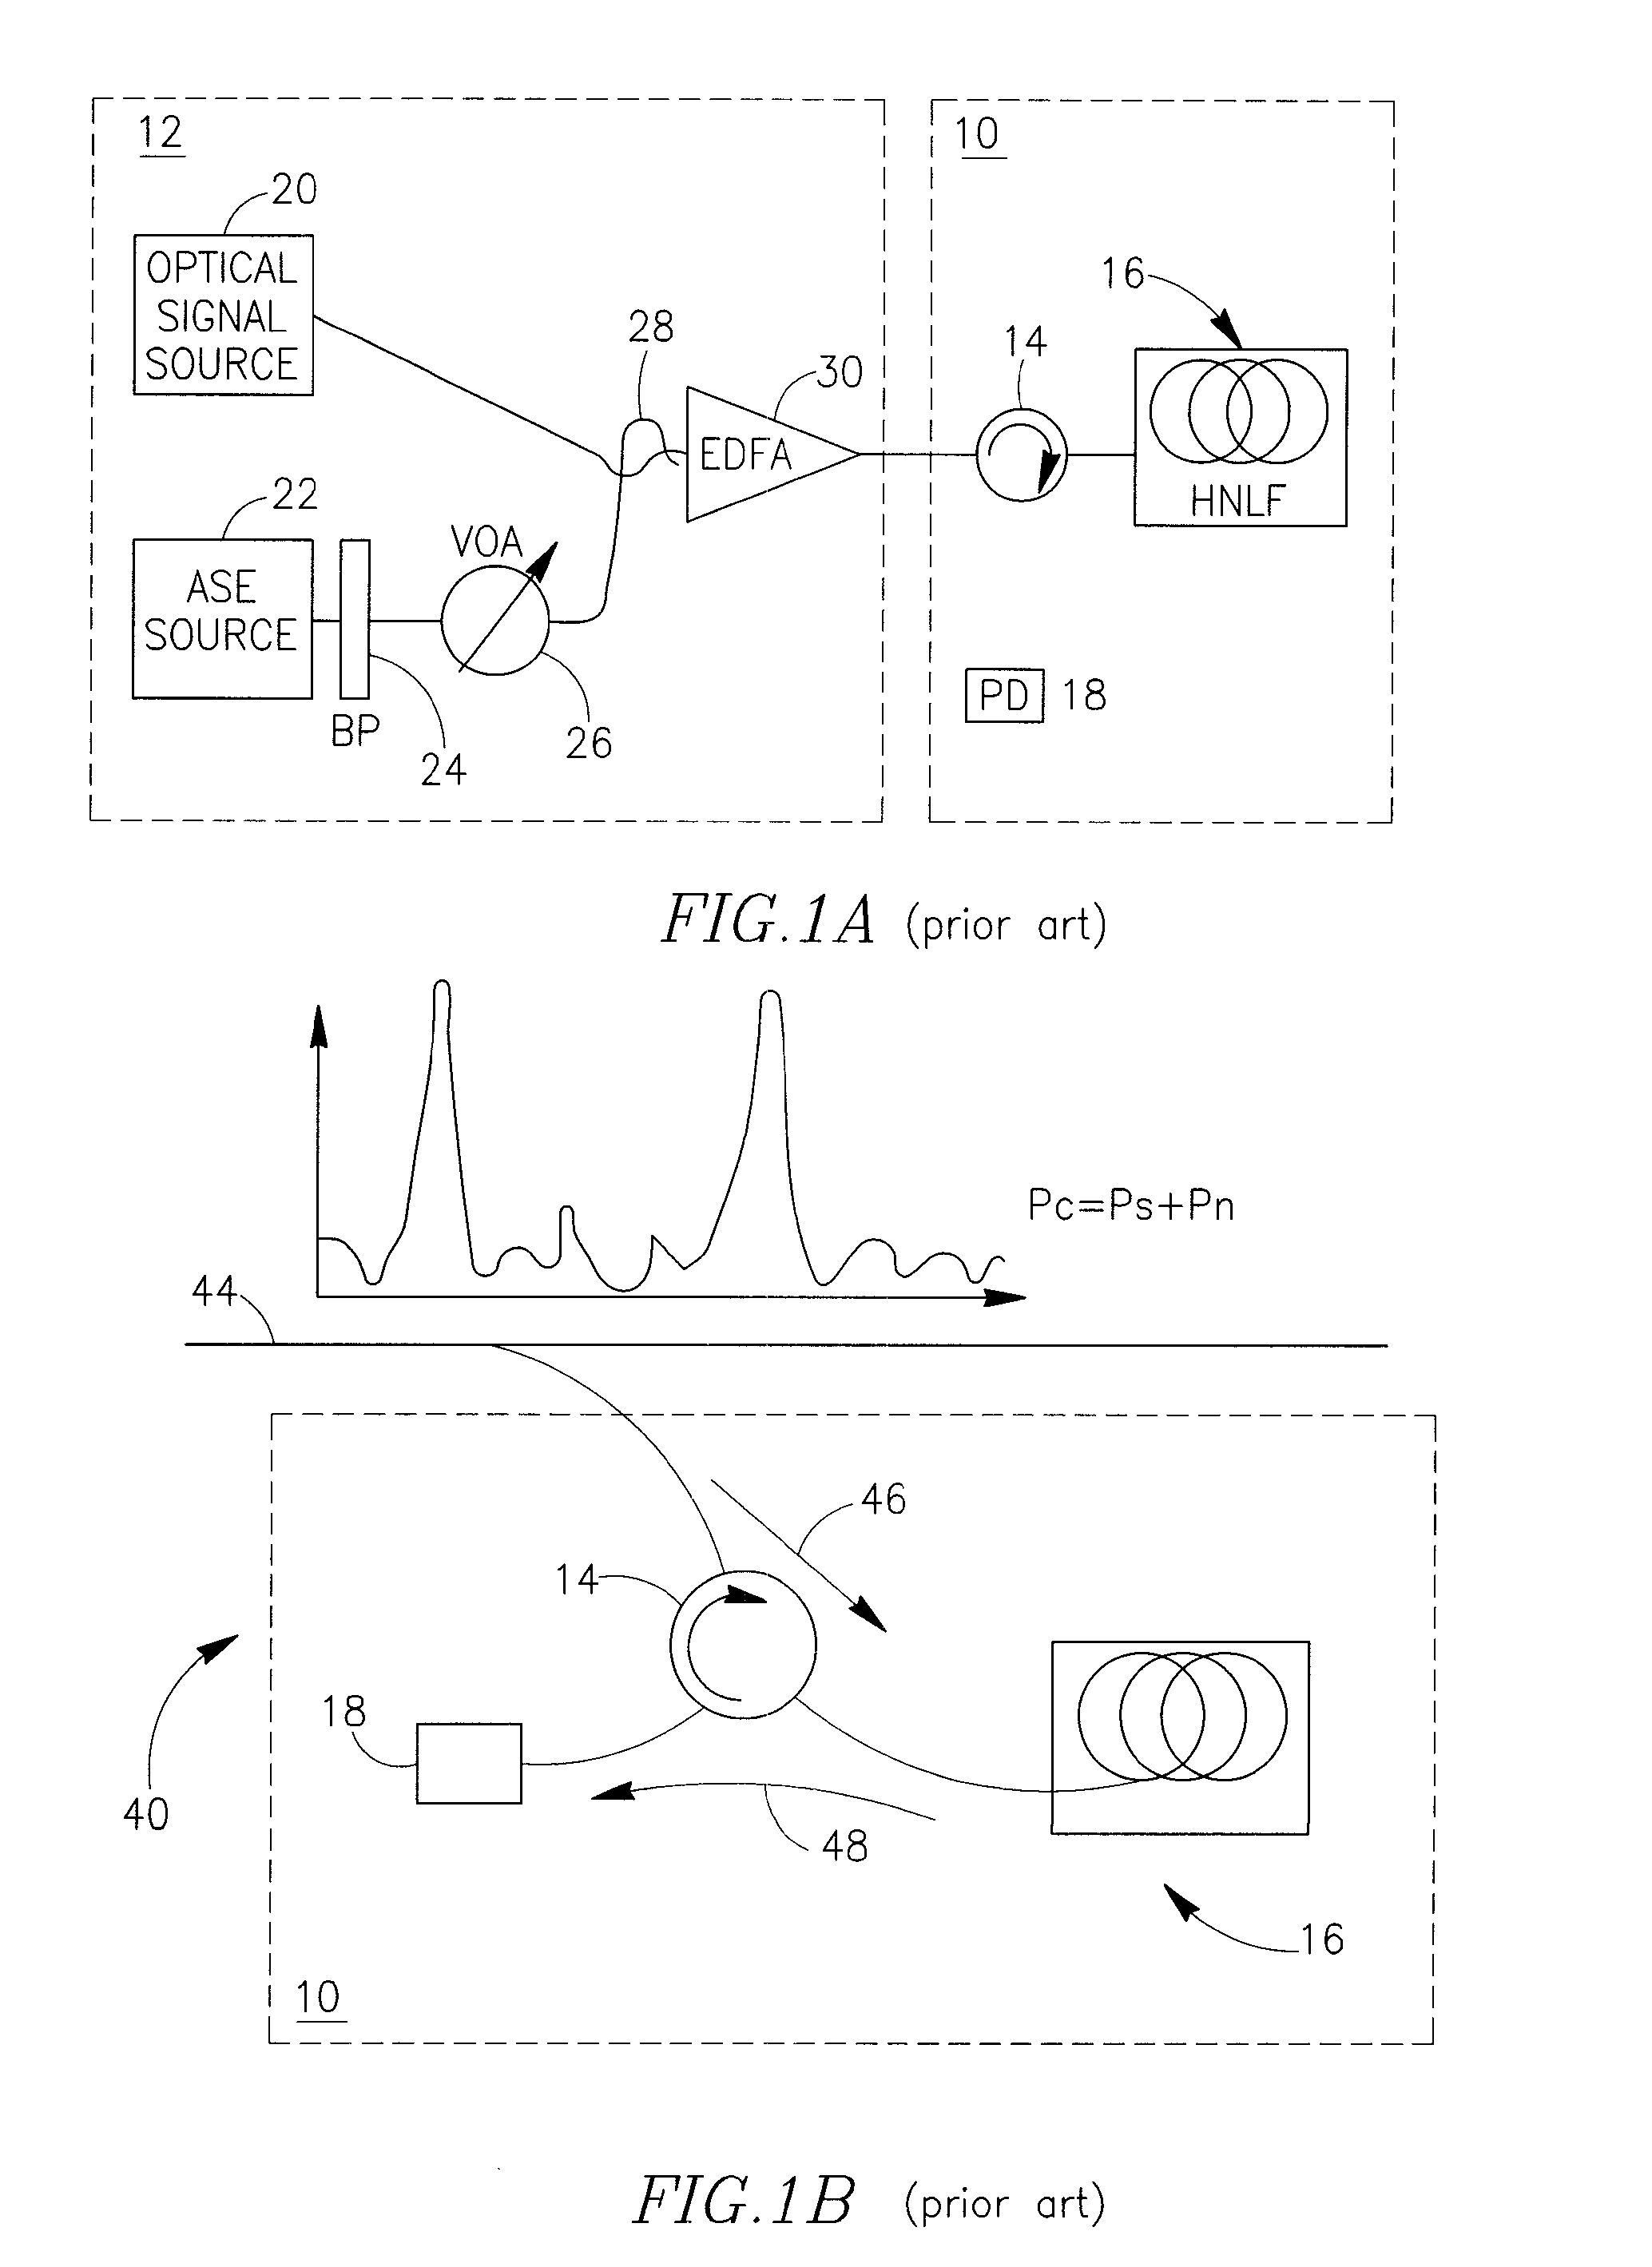 In-band optical signal to noise ratio monitoring technique